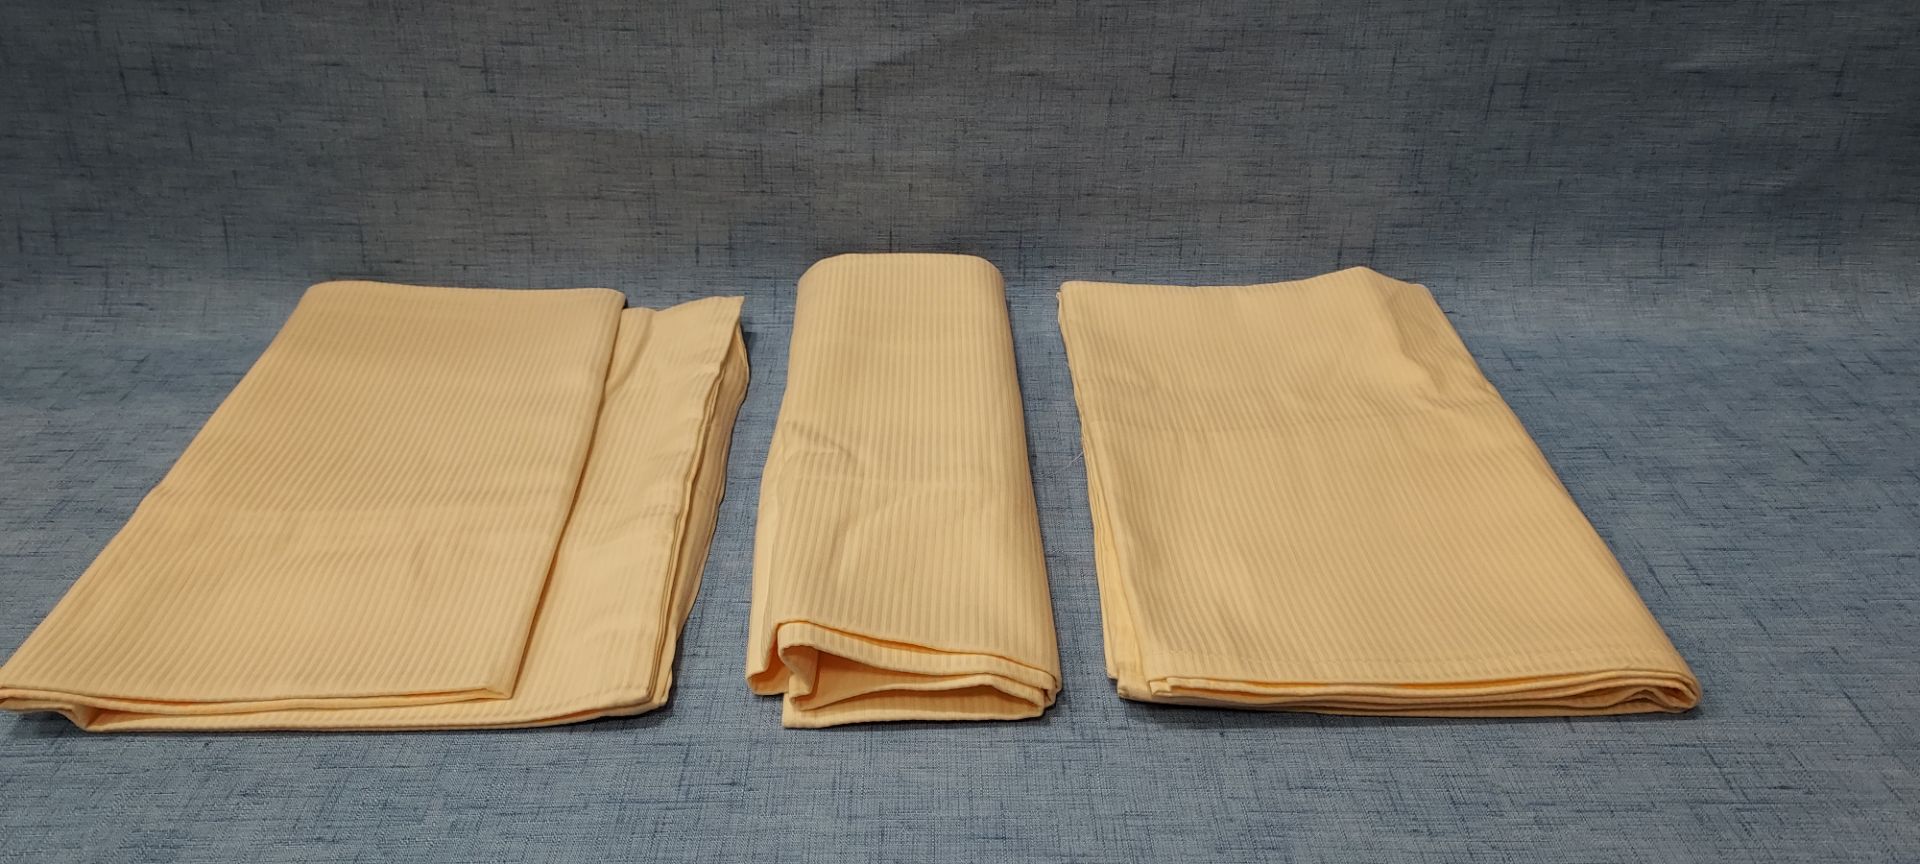 900 X BRAND NEW HILDEN MFG PILLOW CASES IN SIZE 80 X 60CM AND 40 X 60CM AND 40 X40CM IN PINK